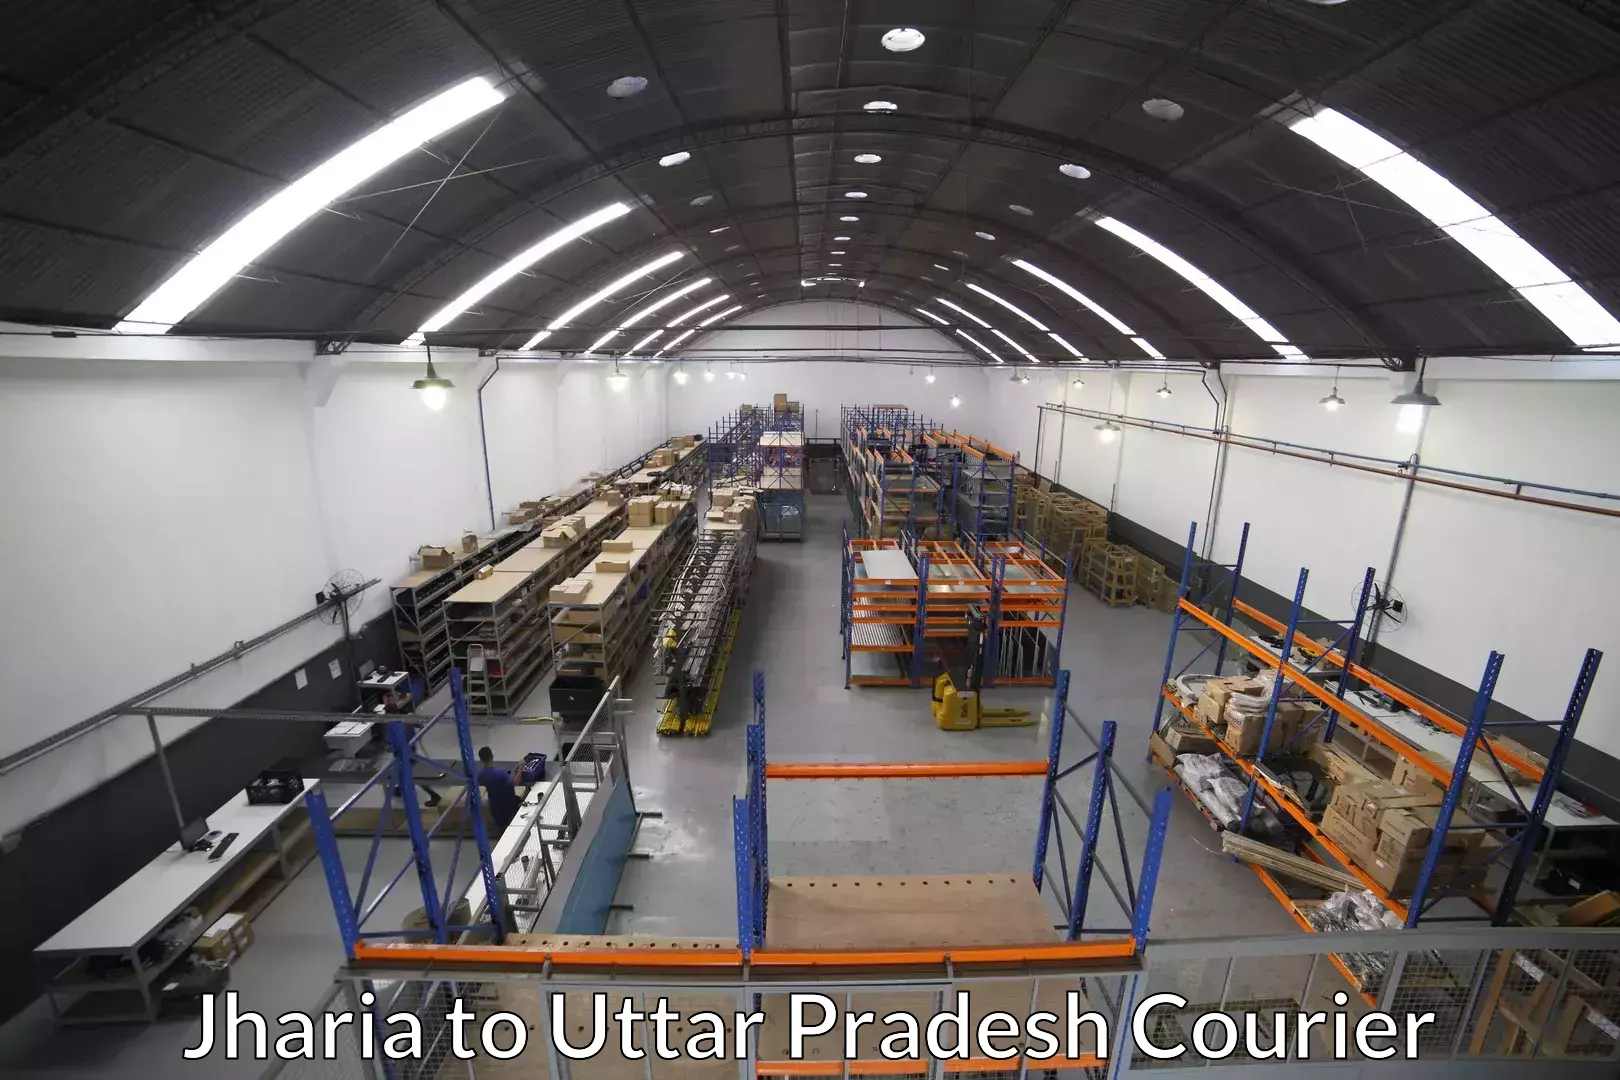 Furniture moving specialists Jharia to Rasra